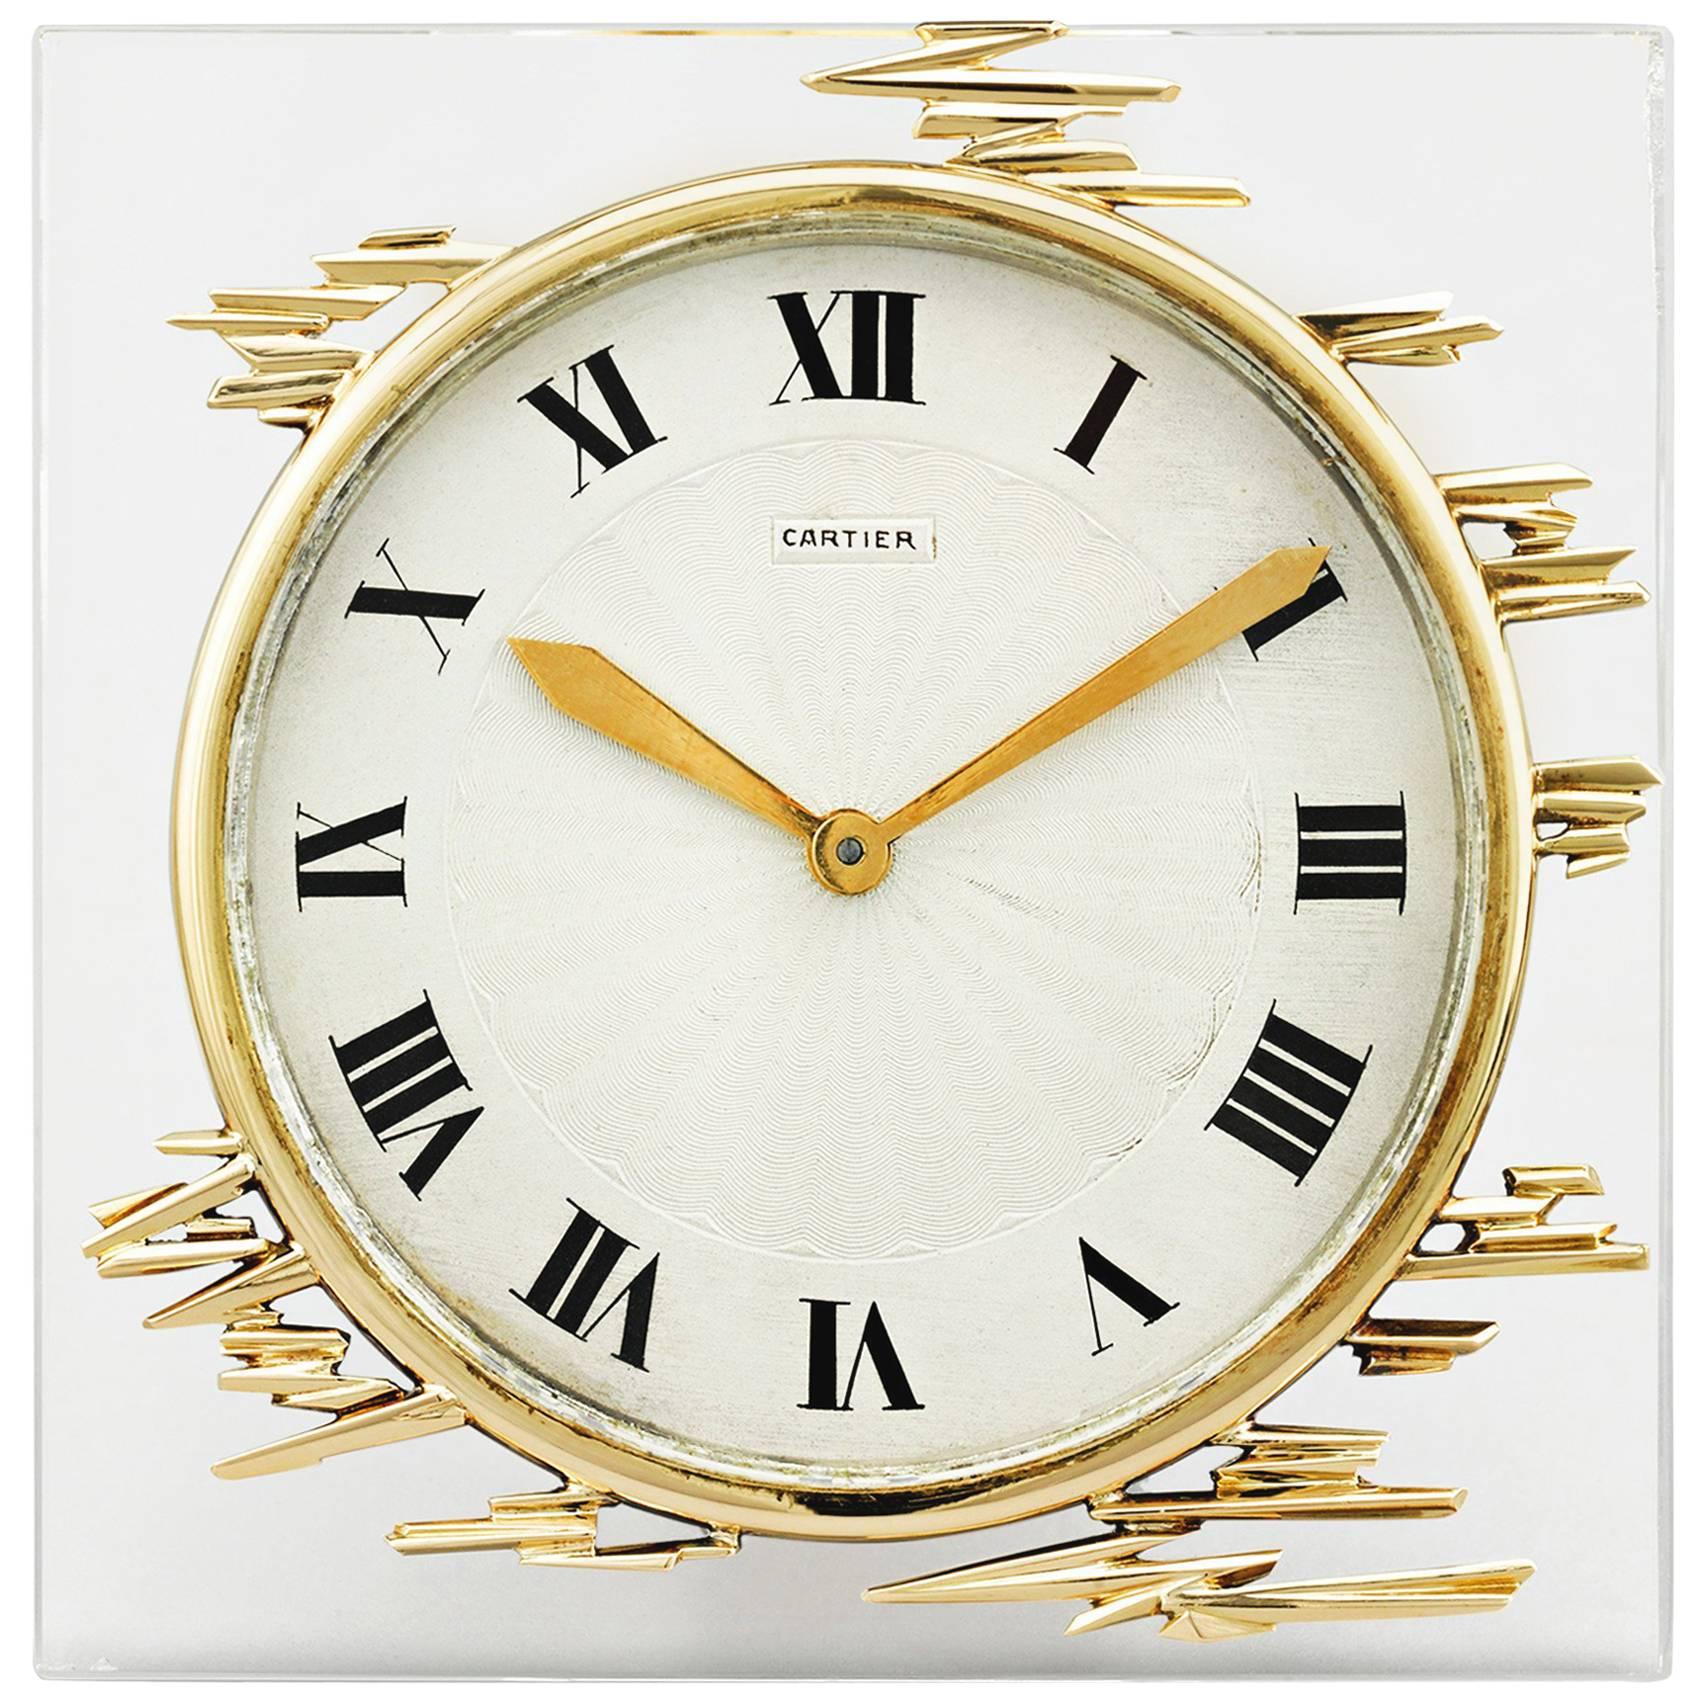 Gold and Crystal Cartier Desk Clock 